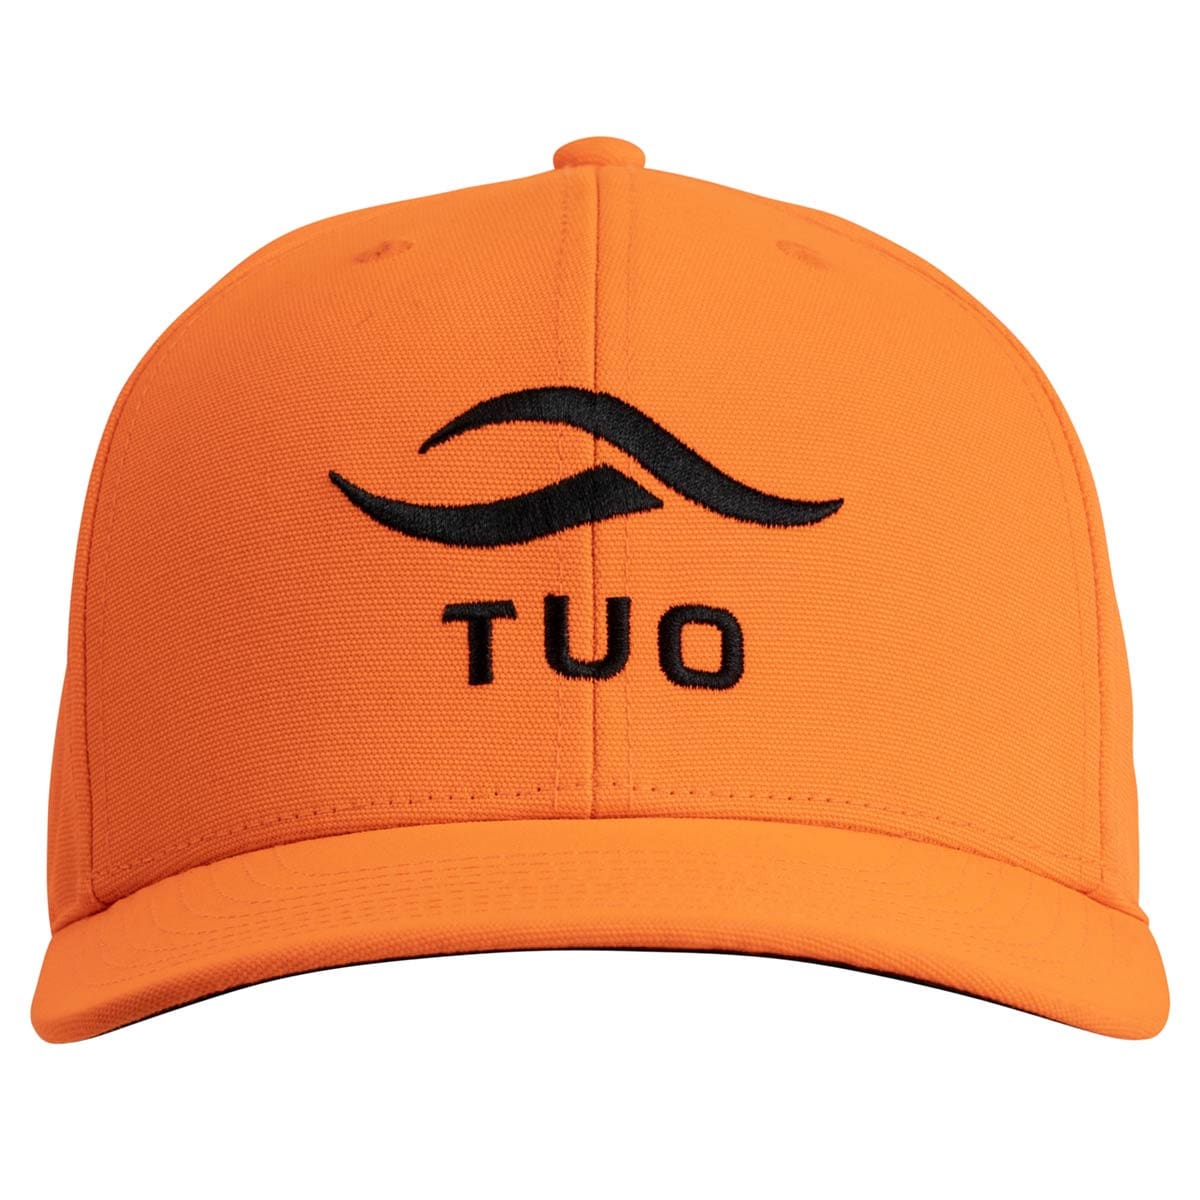 TUO Blaze Hat front facing